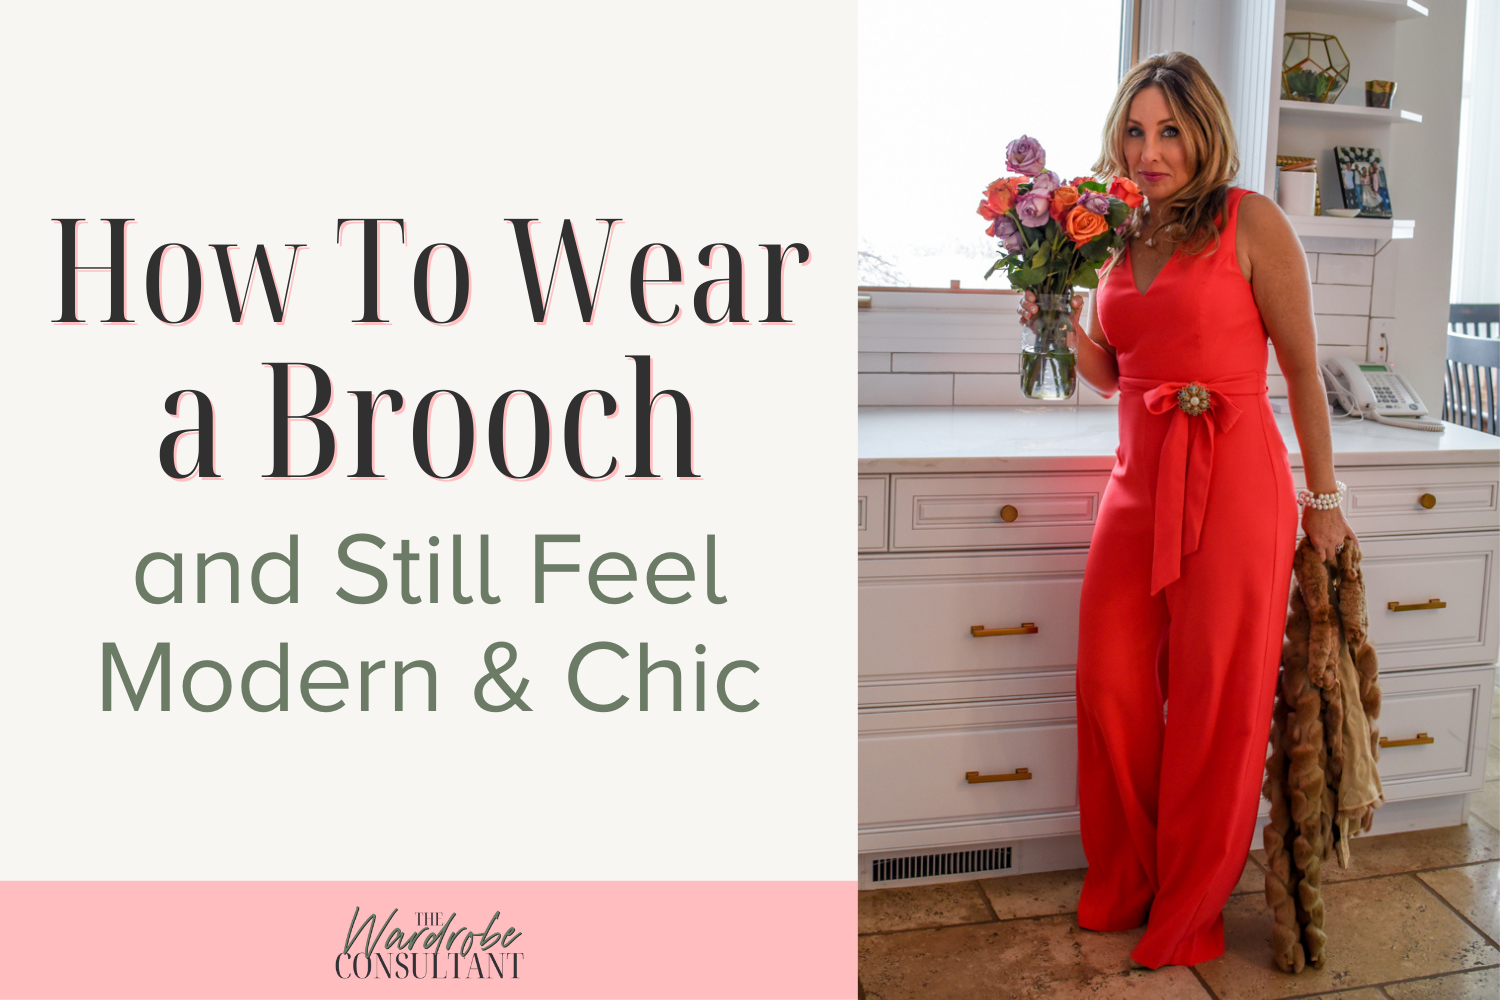 Quick deliveryHOW TO WEAR A BROOCH IN DIFFERENT AND MODERN WAYS